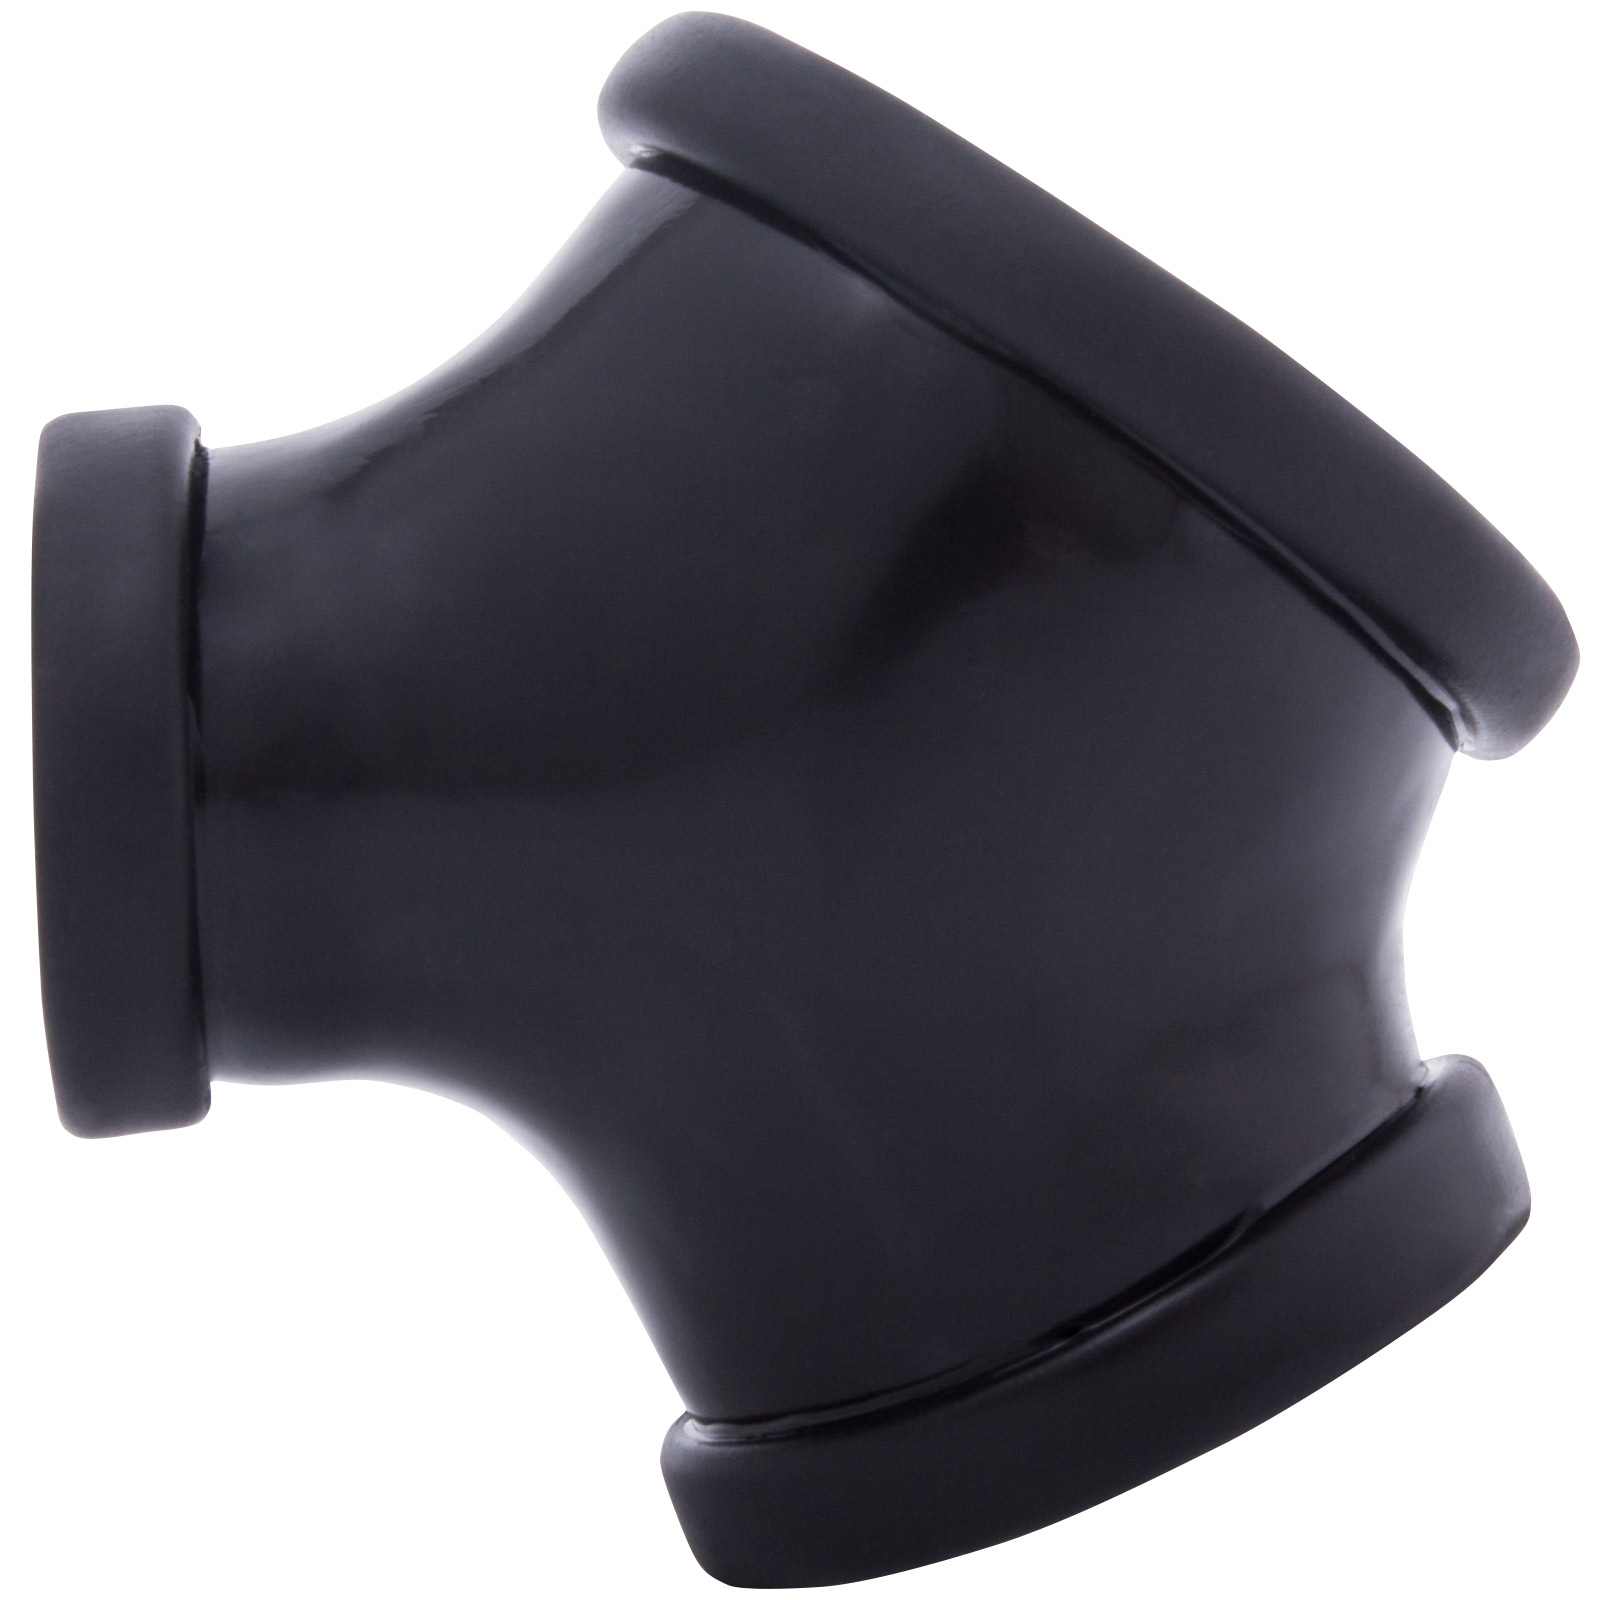 Toylie Latex Penis Sleeve «GIL» black, without shaft, with penis and testicle ring - suitable for vegans